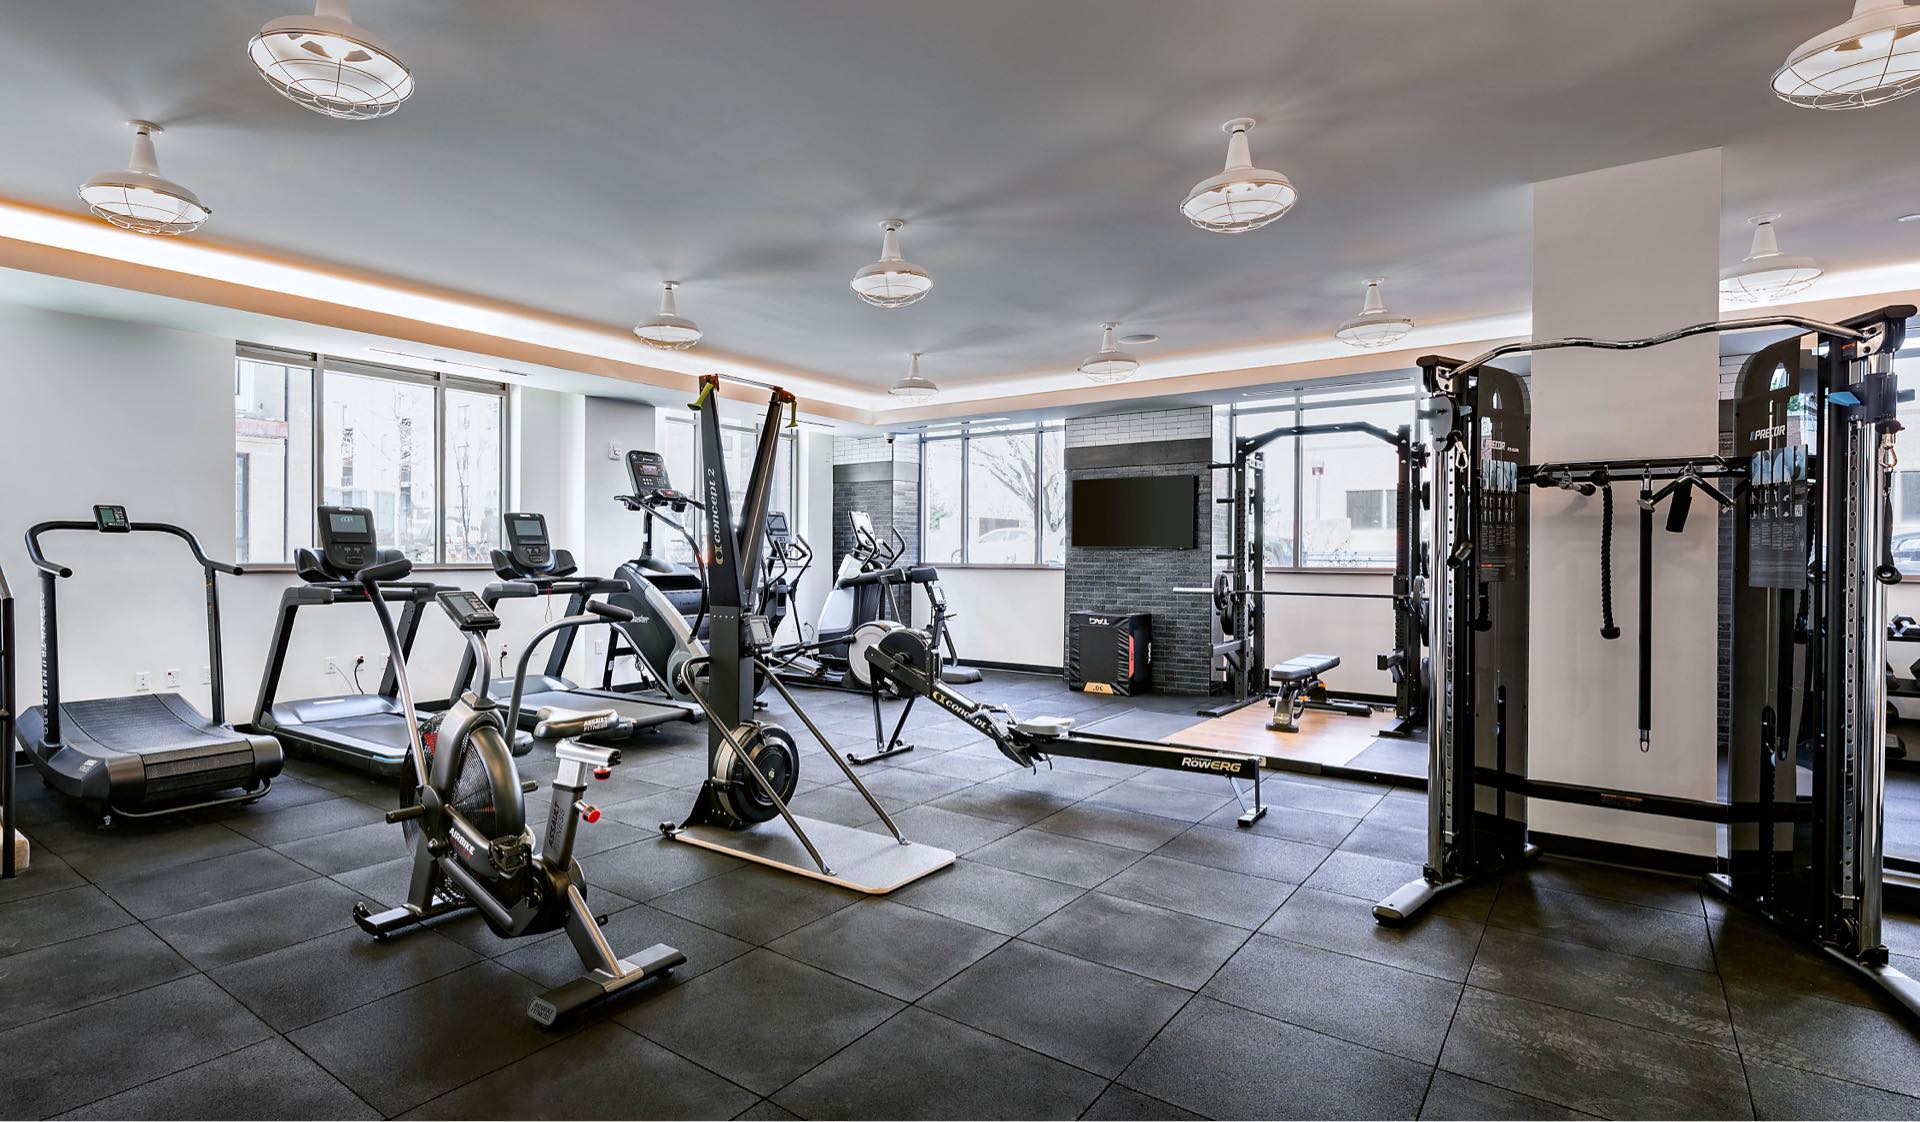 Faraday Park East fitness center featuring a variety of workout machines